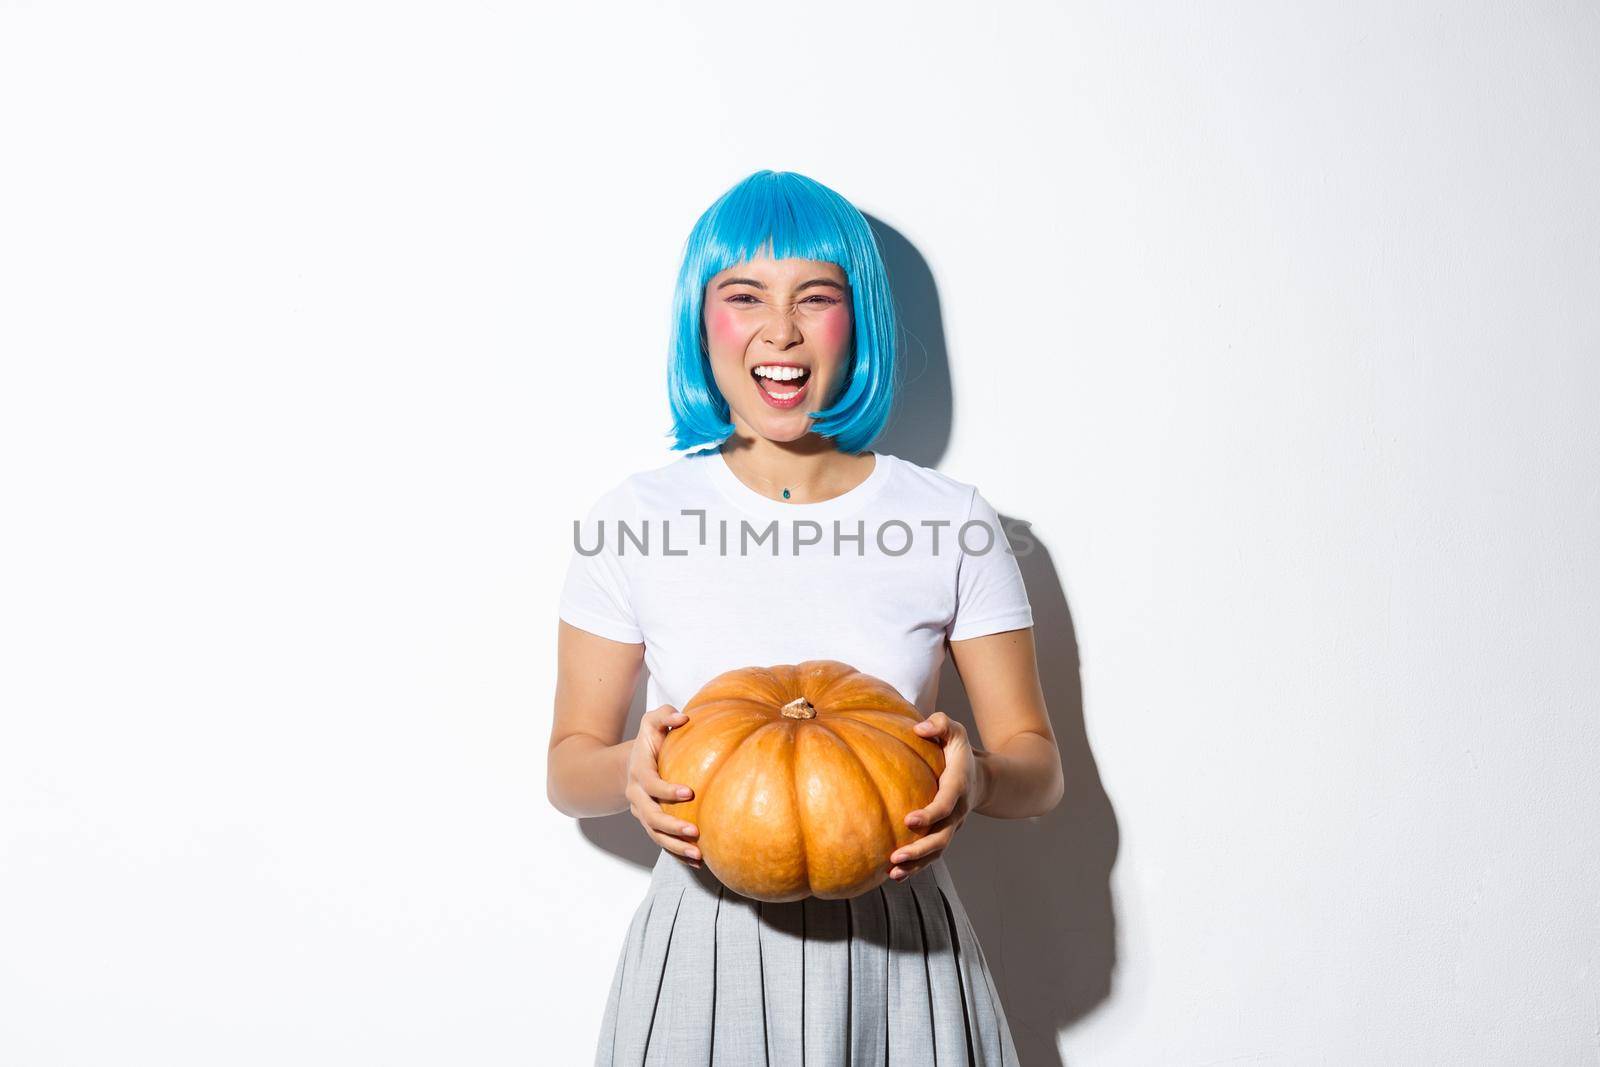 Sassy attractive girl partying, celebrating halloween in blue wig and holding pumpkin, standing over white background.